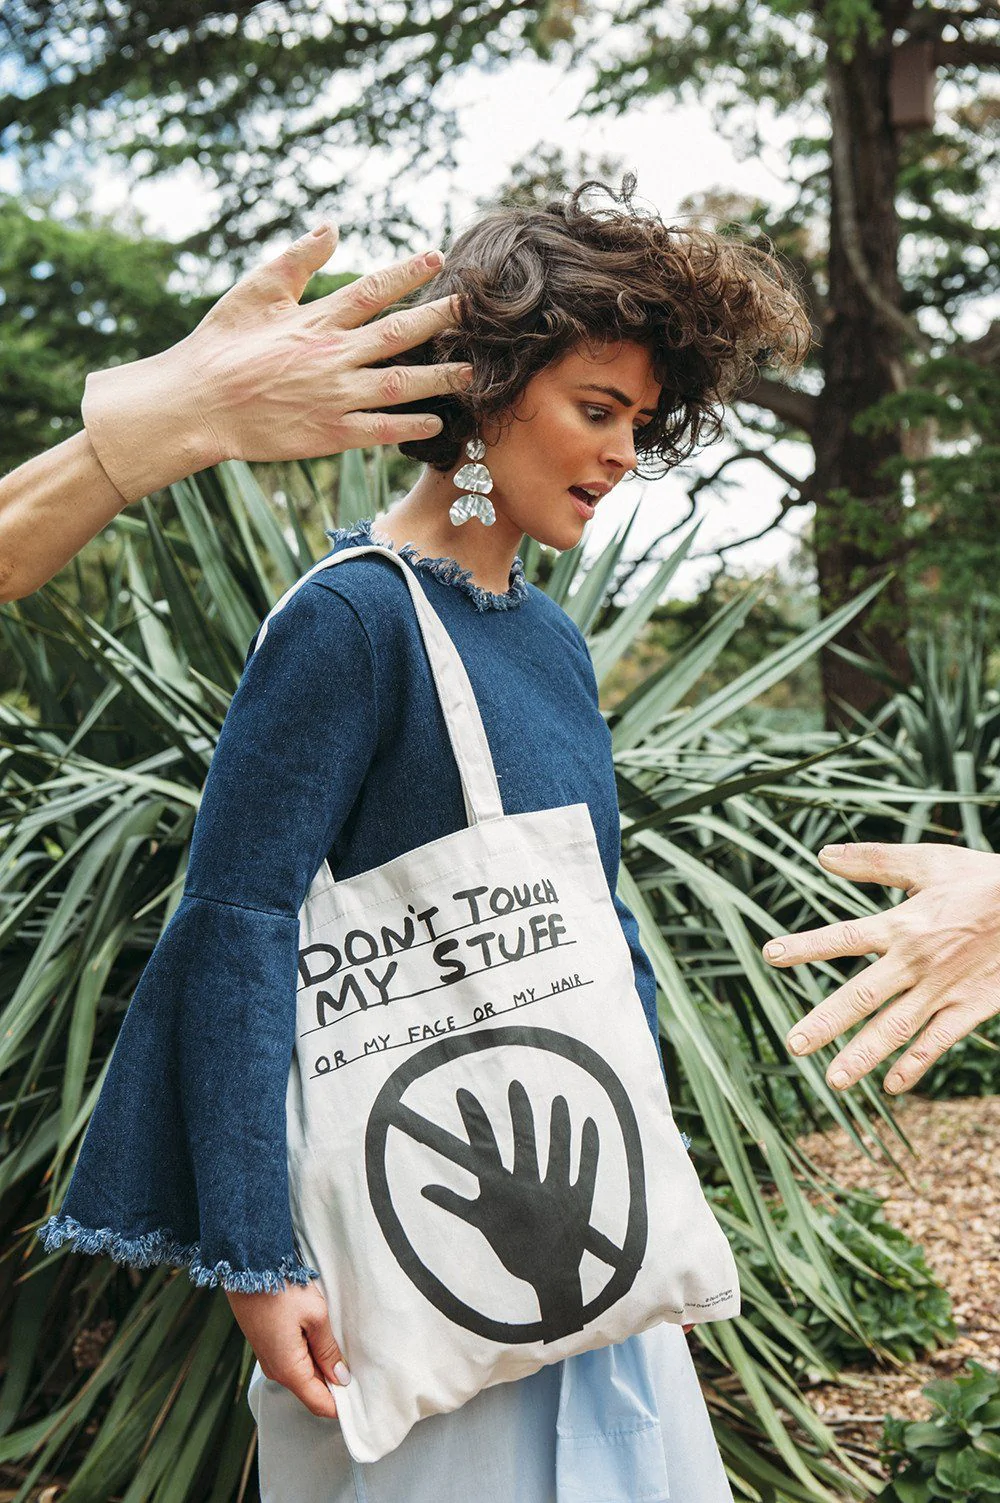 Don't Touch My Stuff Tote Bag x David Shrigley